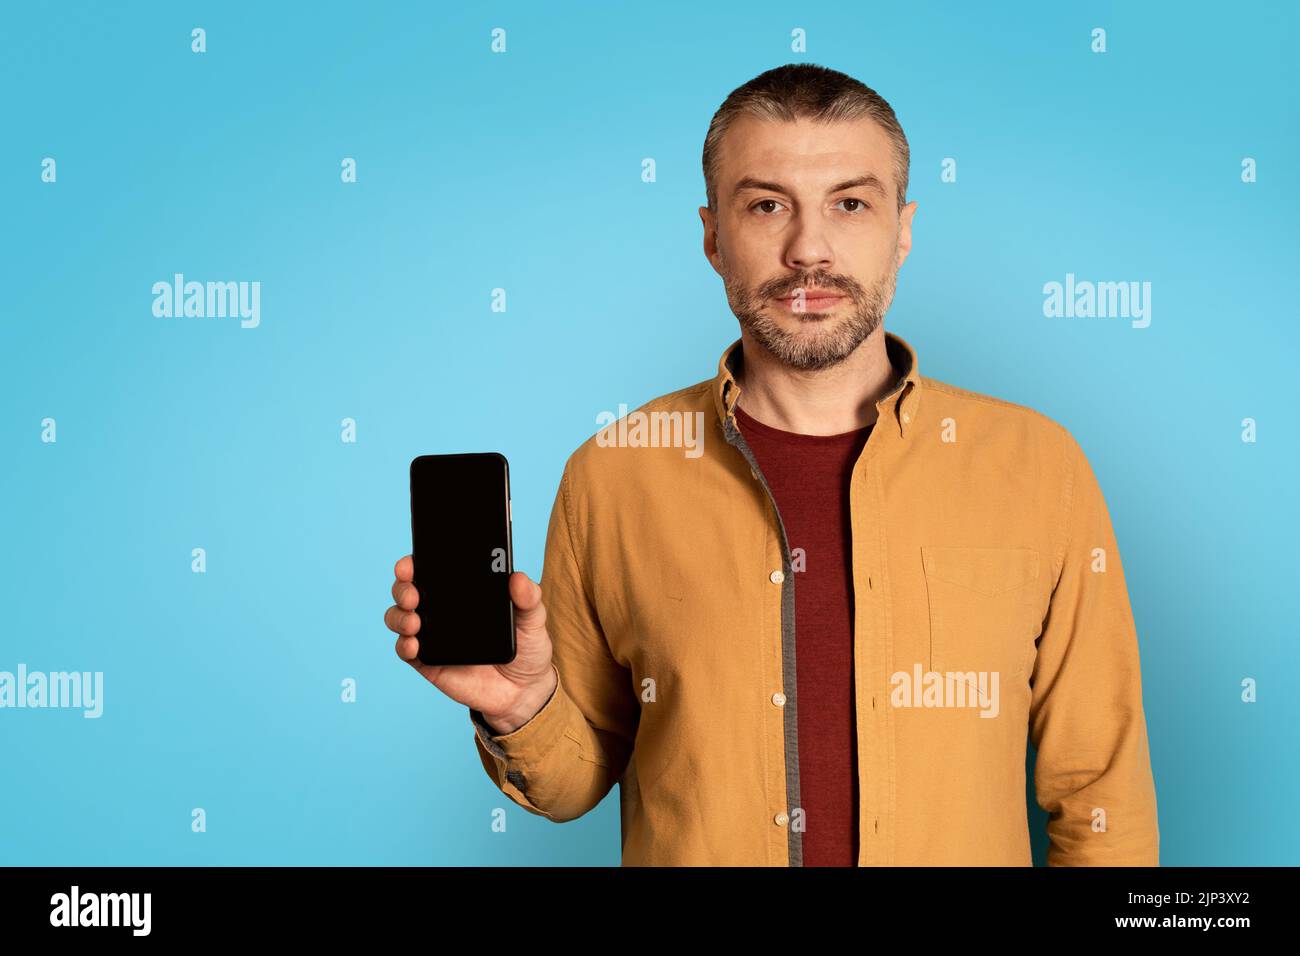 Serious Man Showing Smartphone With Empty Screen On Blue Background Stock Photo